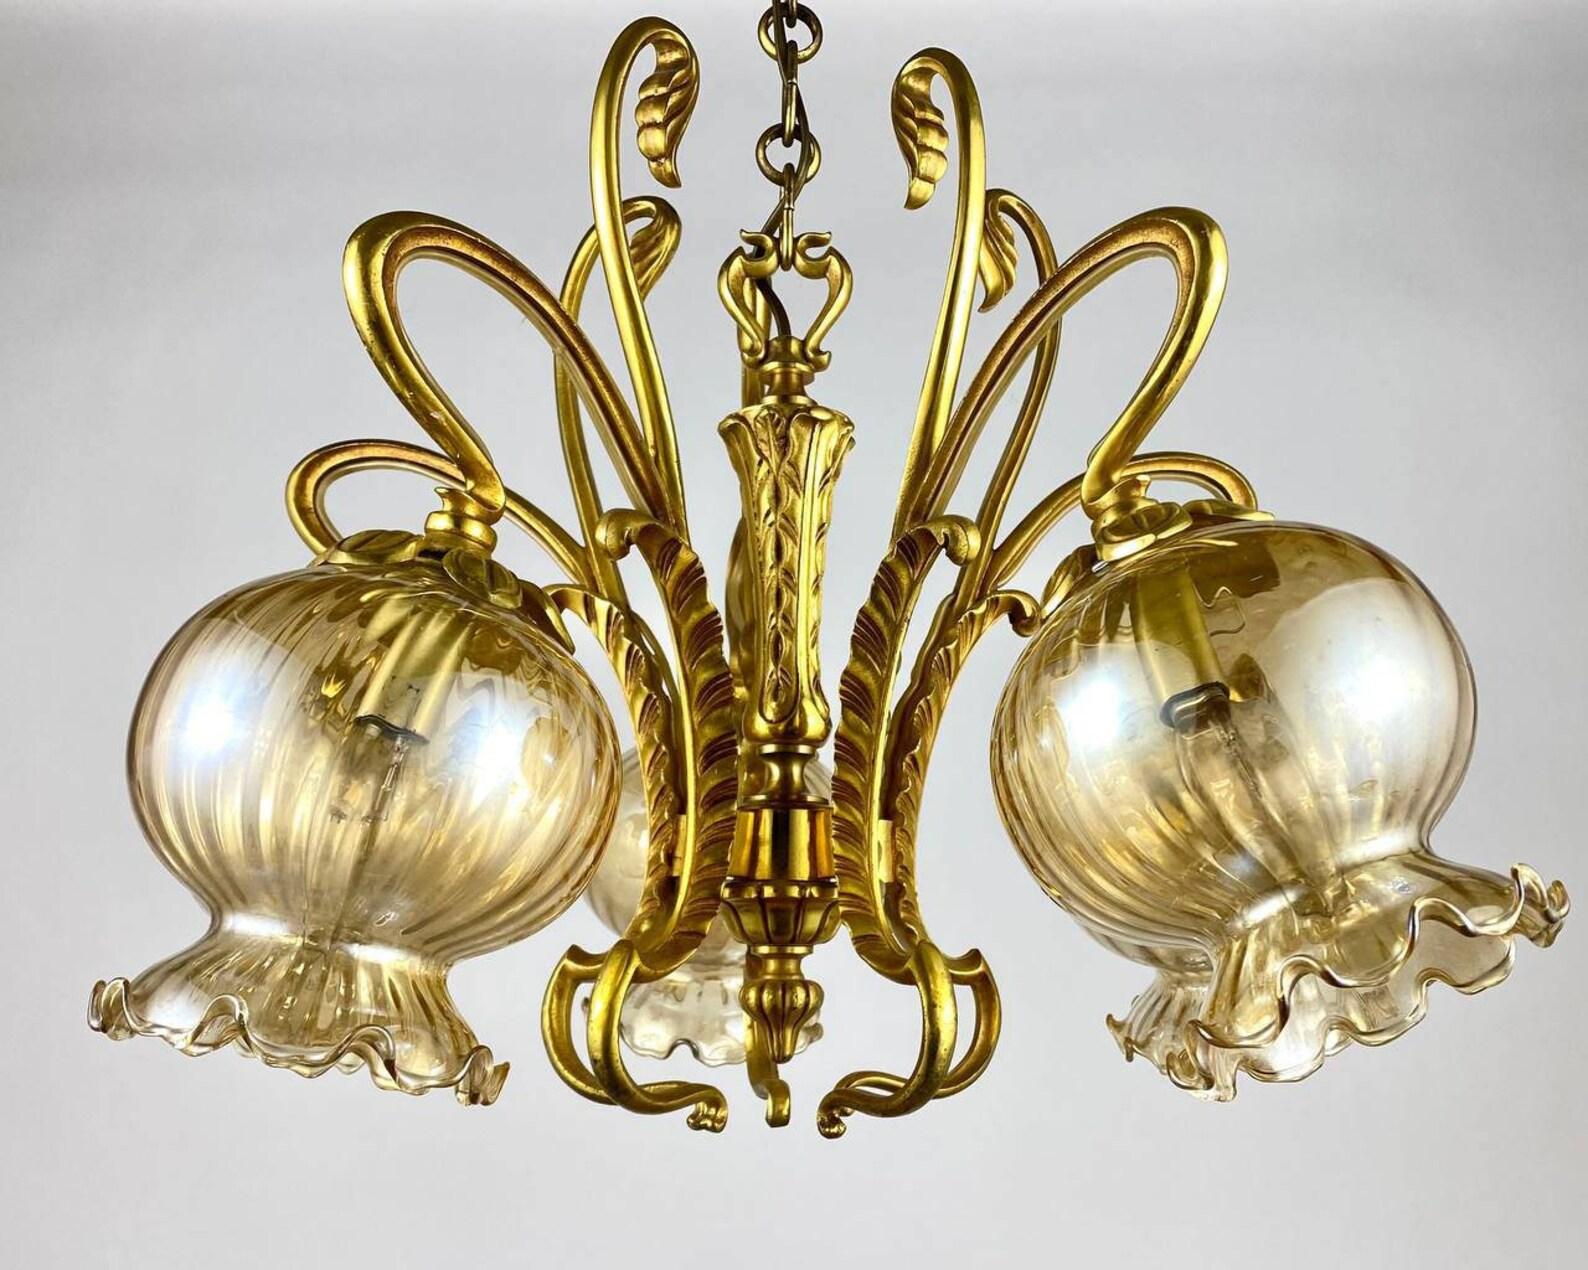 Large vintage graceful chandelier of classical style from the Belgium Manufactory. Circa 1980s. 

Beautiful chandelier with 5 light points is the quality in every detail of the lighting fixture. 

The gilt brass fittings look solid and glass